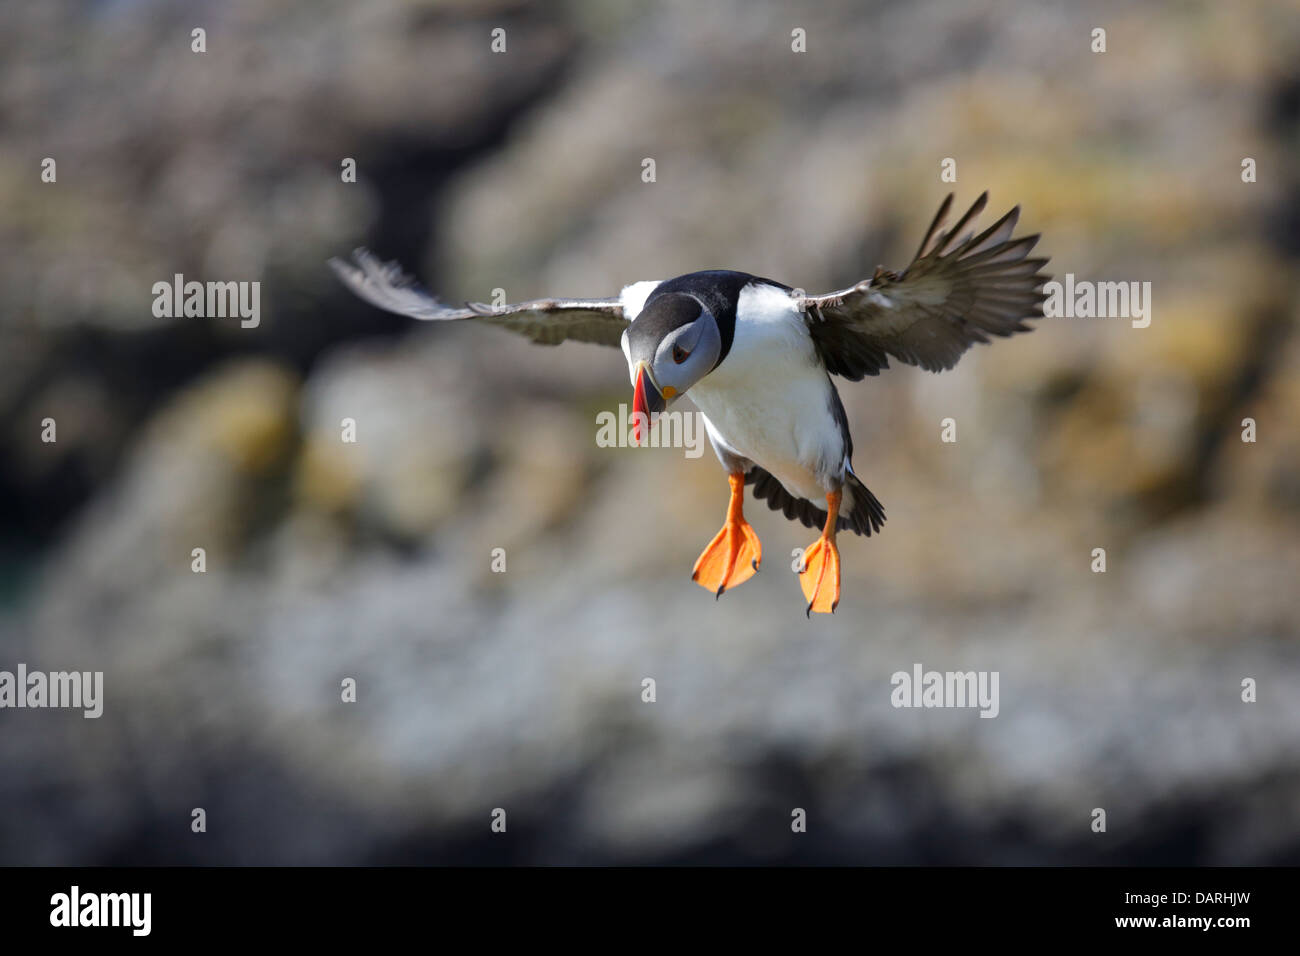 Puffin flying Stock Photo